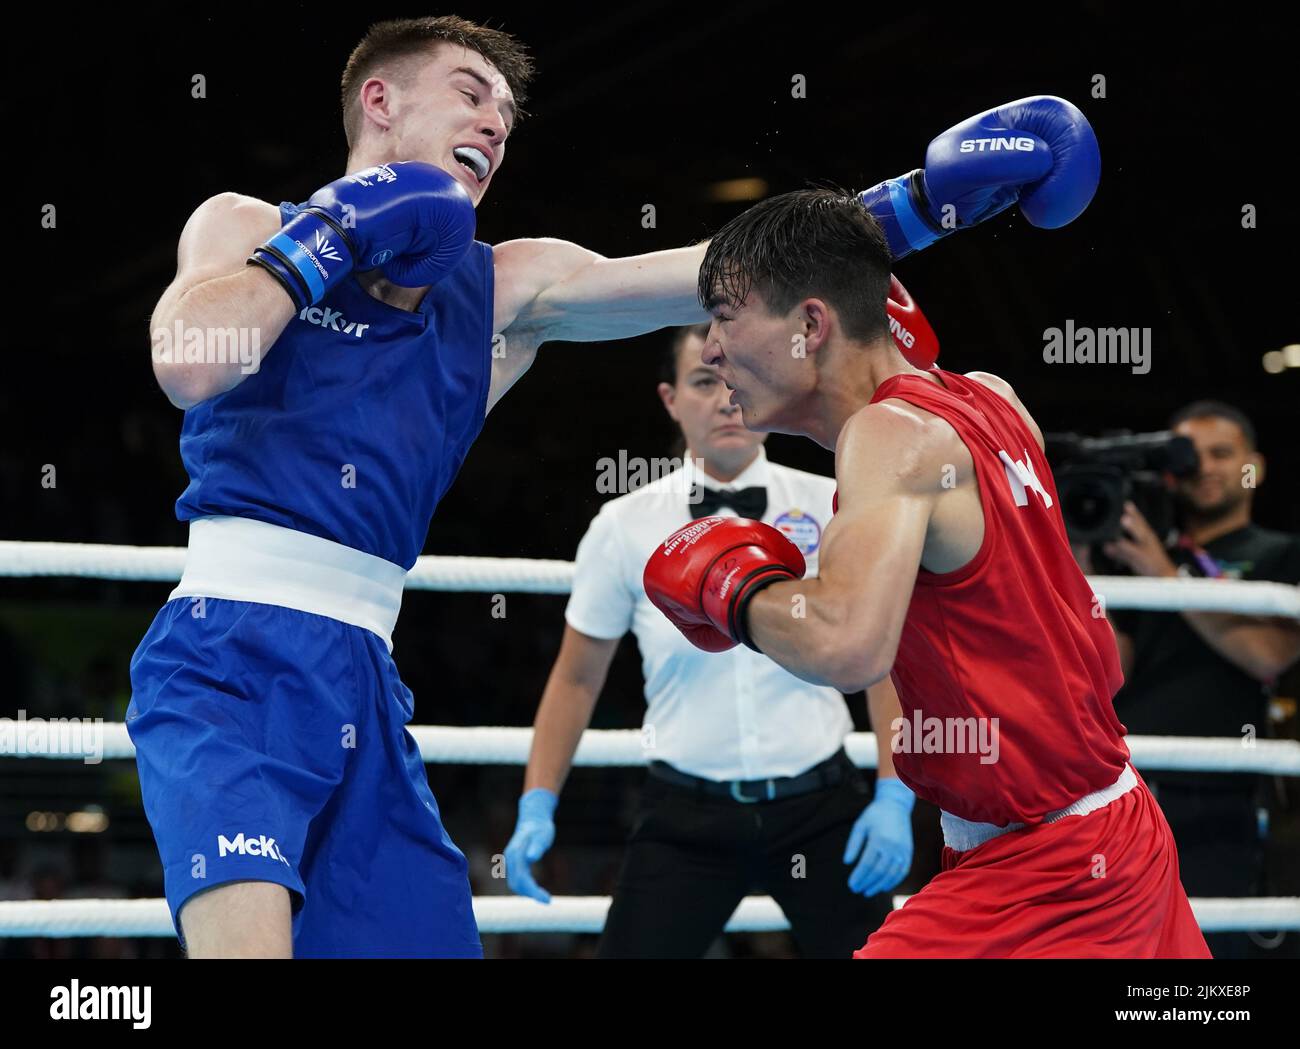 Pakistan's Ilyas Hussain and Northern Ireland's Jude Gallagher(blue) during the Men’s 54kg- 57kg (Featherweight) - Quarter-Final 3 at The NEC on day six of the 2022 Commonwealth Games in Birmingham. Picture date: Wednesday August 3, 2022. Stock Photo